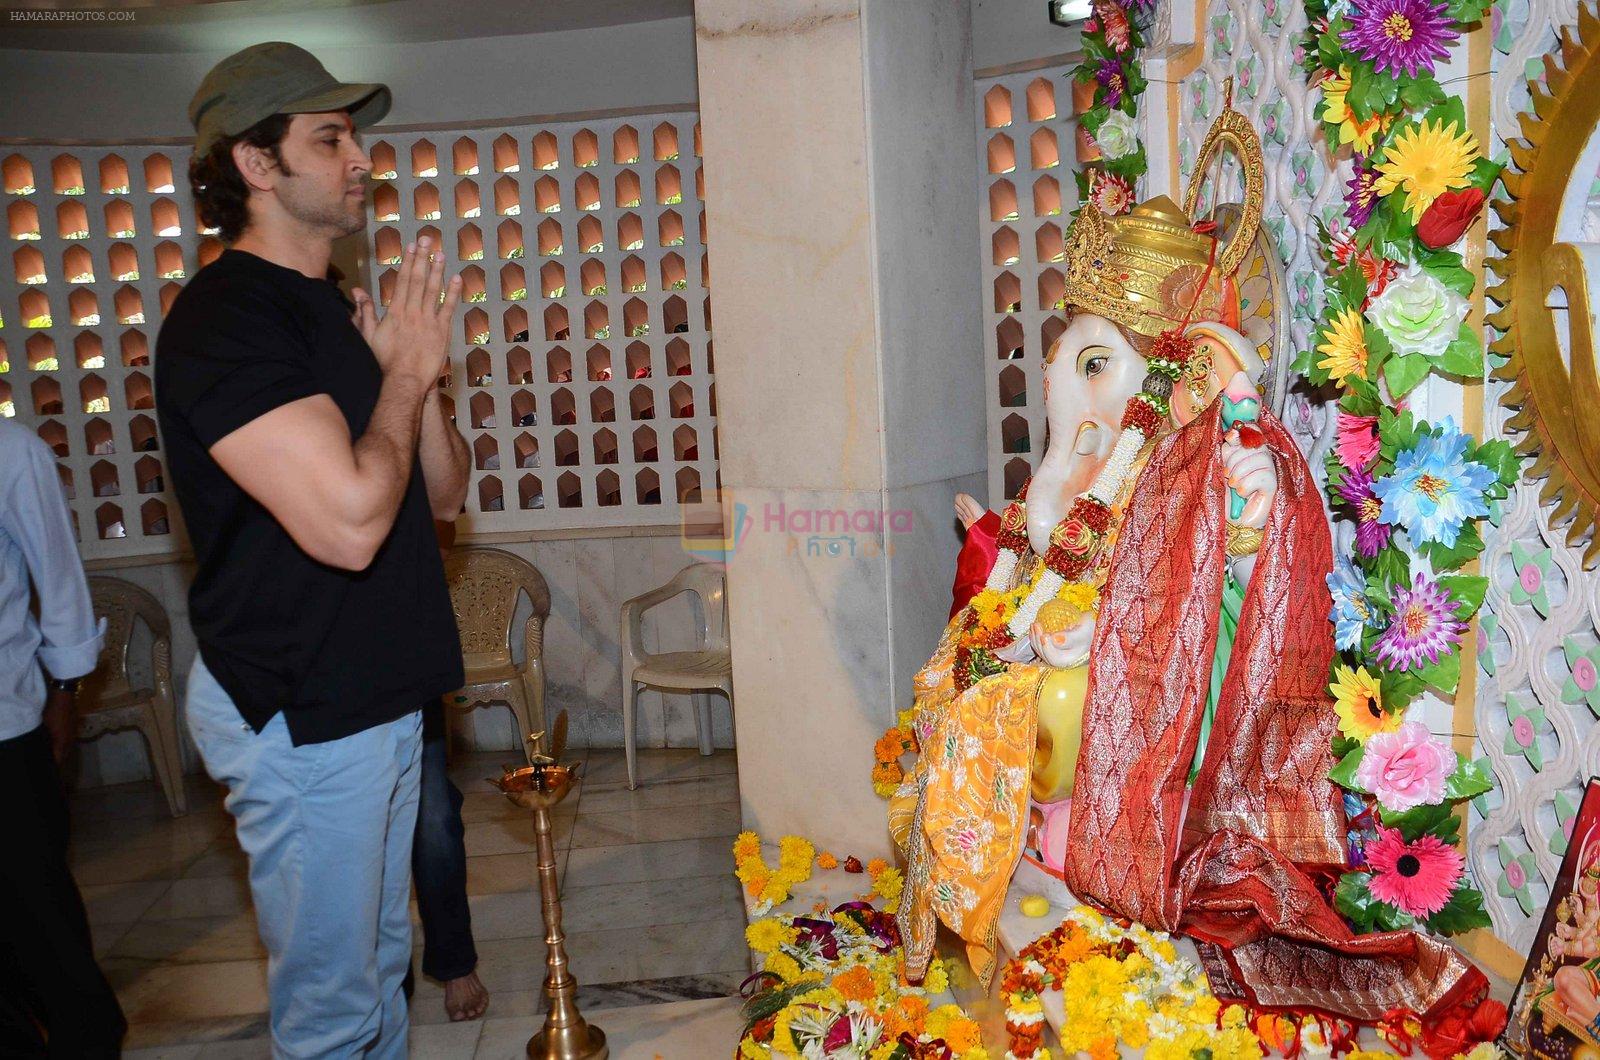 Hrithik Roshan and family snapped at Shiv Ratri celebrations on 7th March 2016